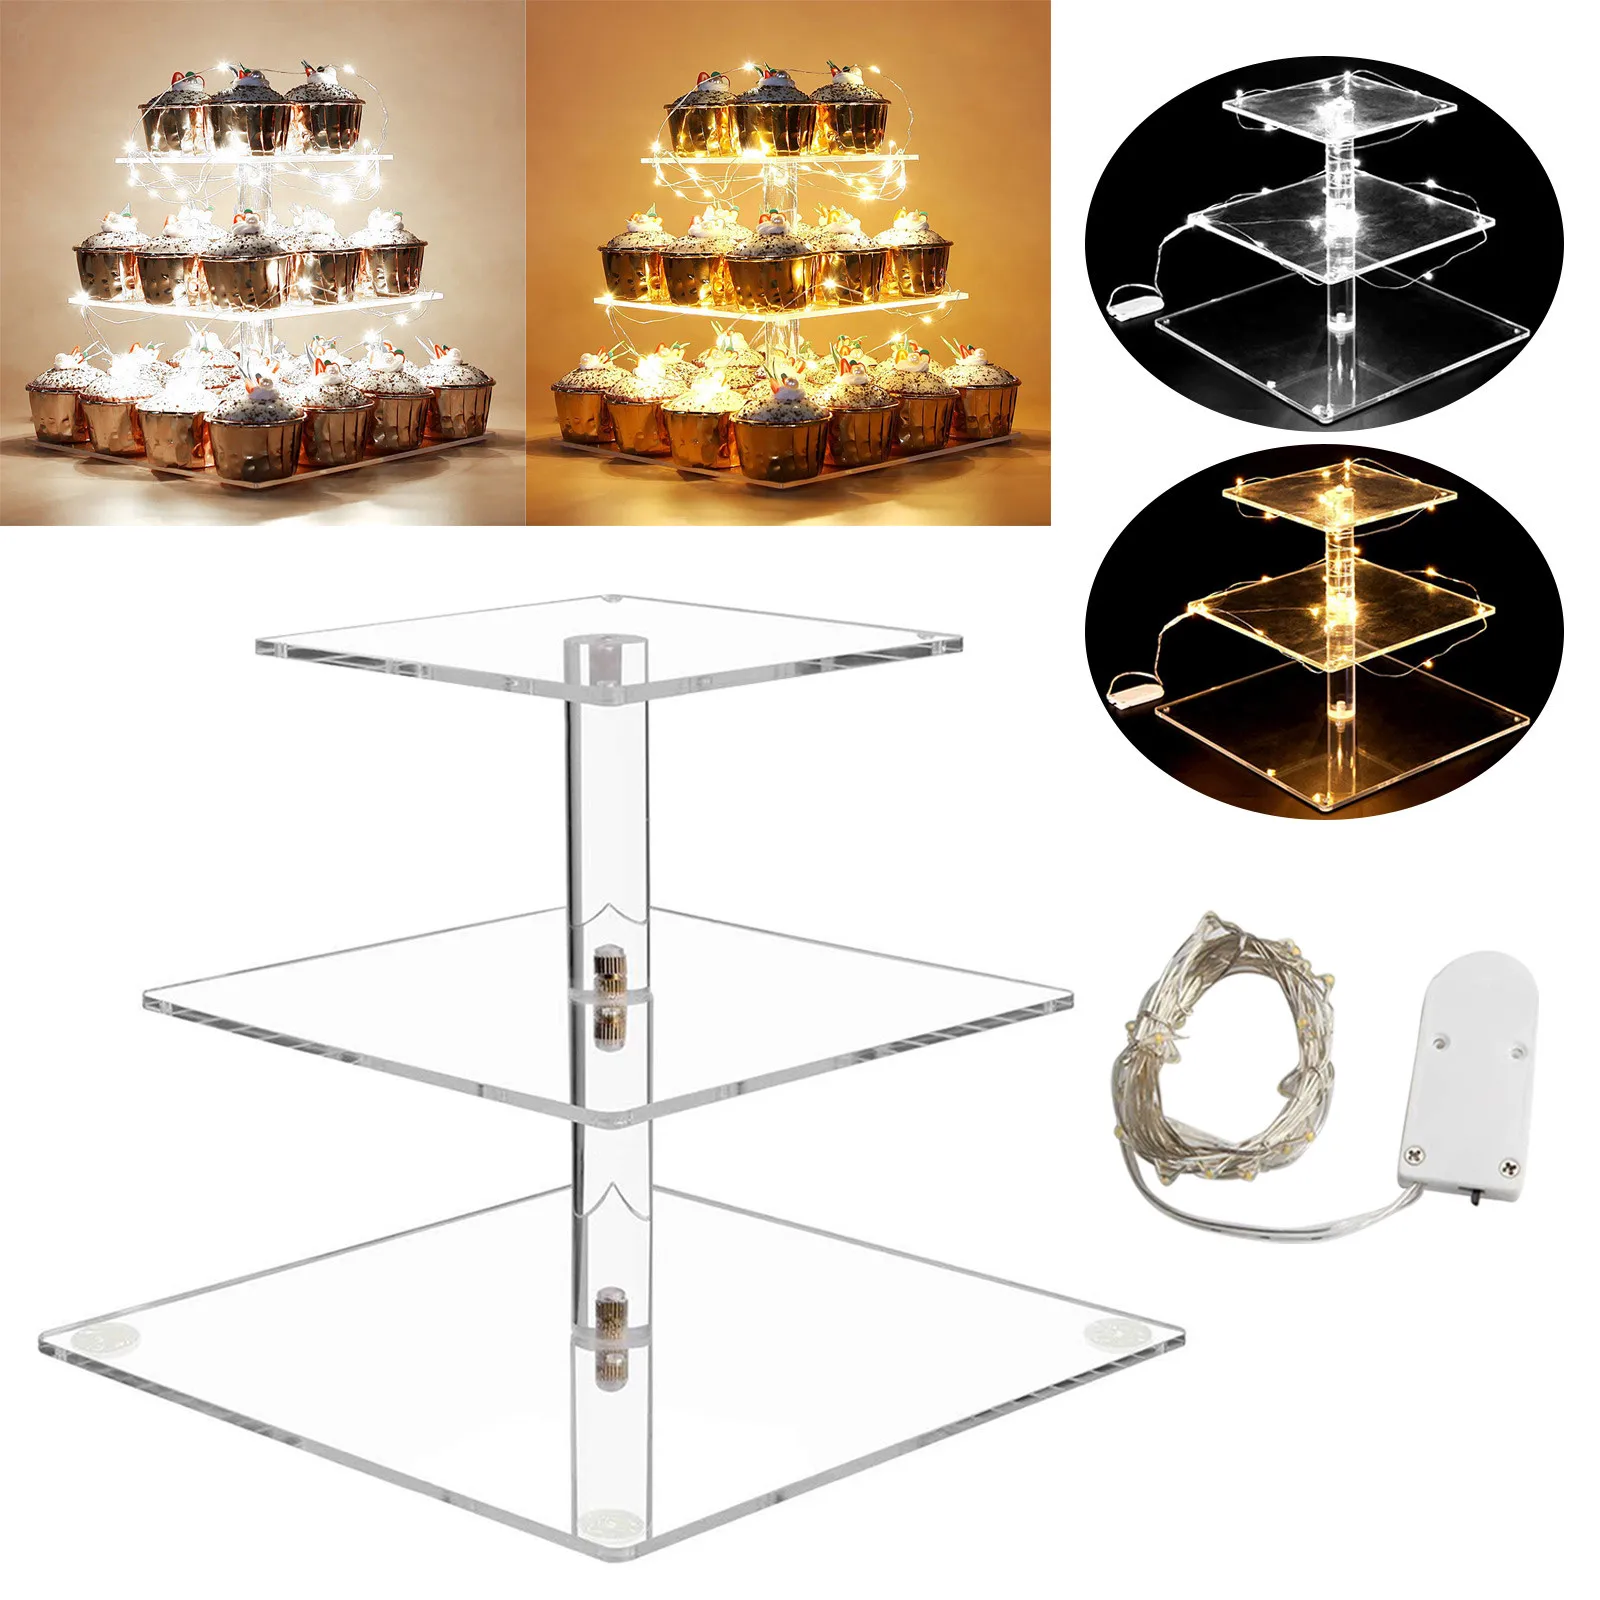 3-Tier Cake Plate Stand LED Light String Cupcake Holder Acrylic Cupcake Display Stand Holder Wedding Party Decoration Cake Tools